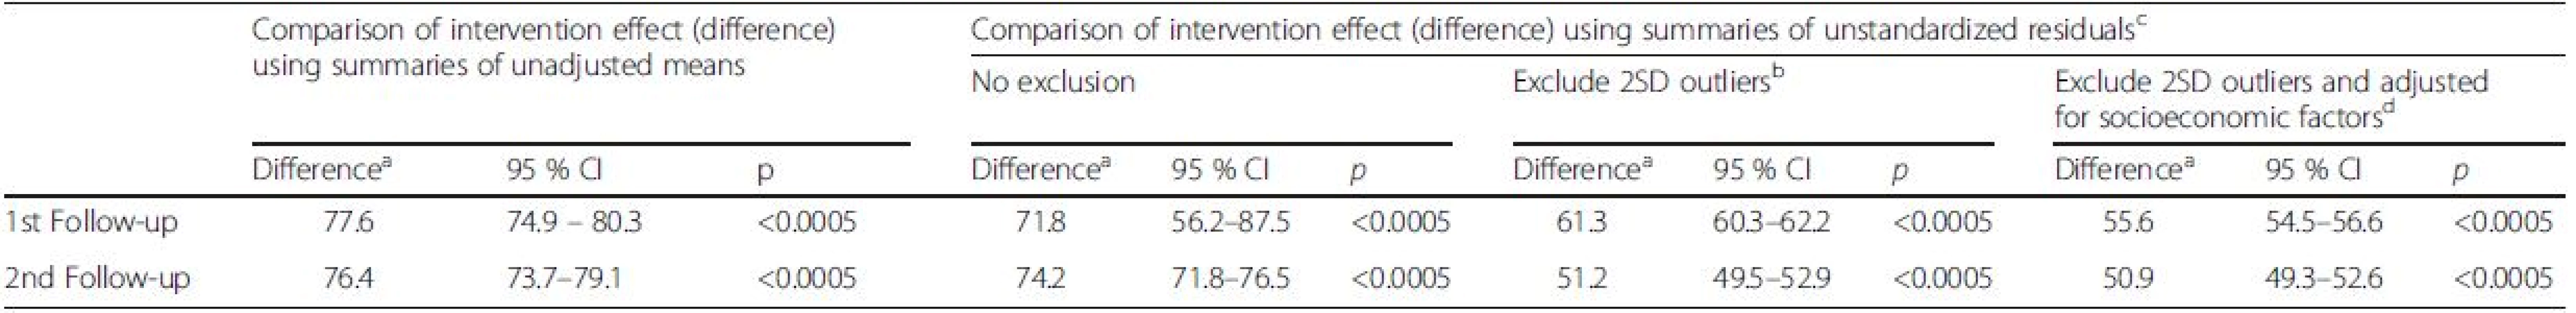 Changes in intervention effects (difference<sup>a</sup>) for load-bearing moderate to vigorous physical activity (MVPA) results at 1st and 2nd follow-up at cluster level